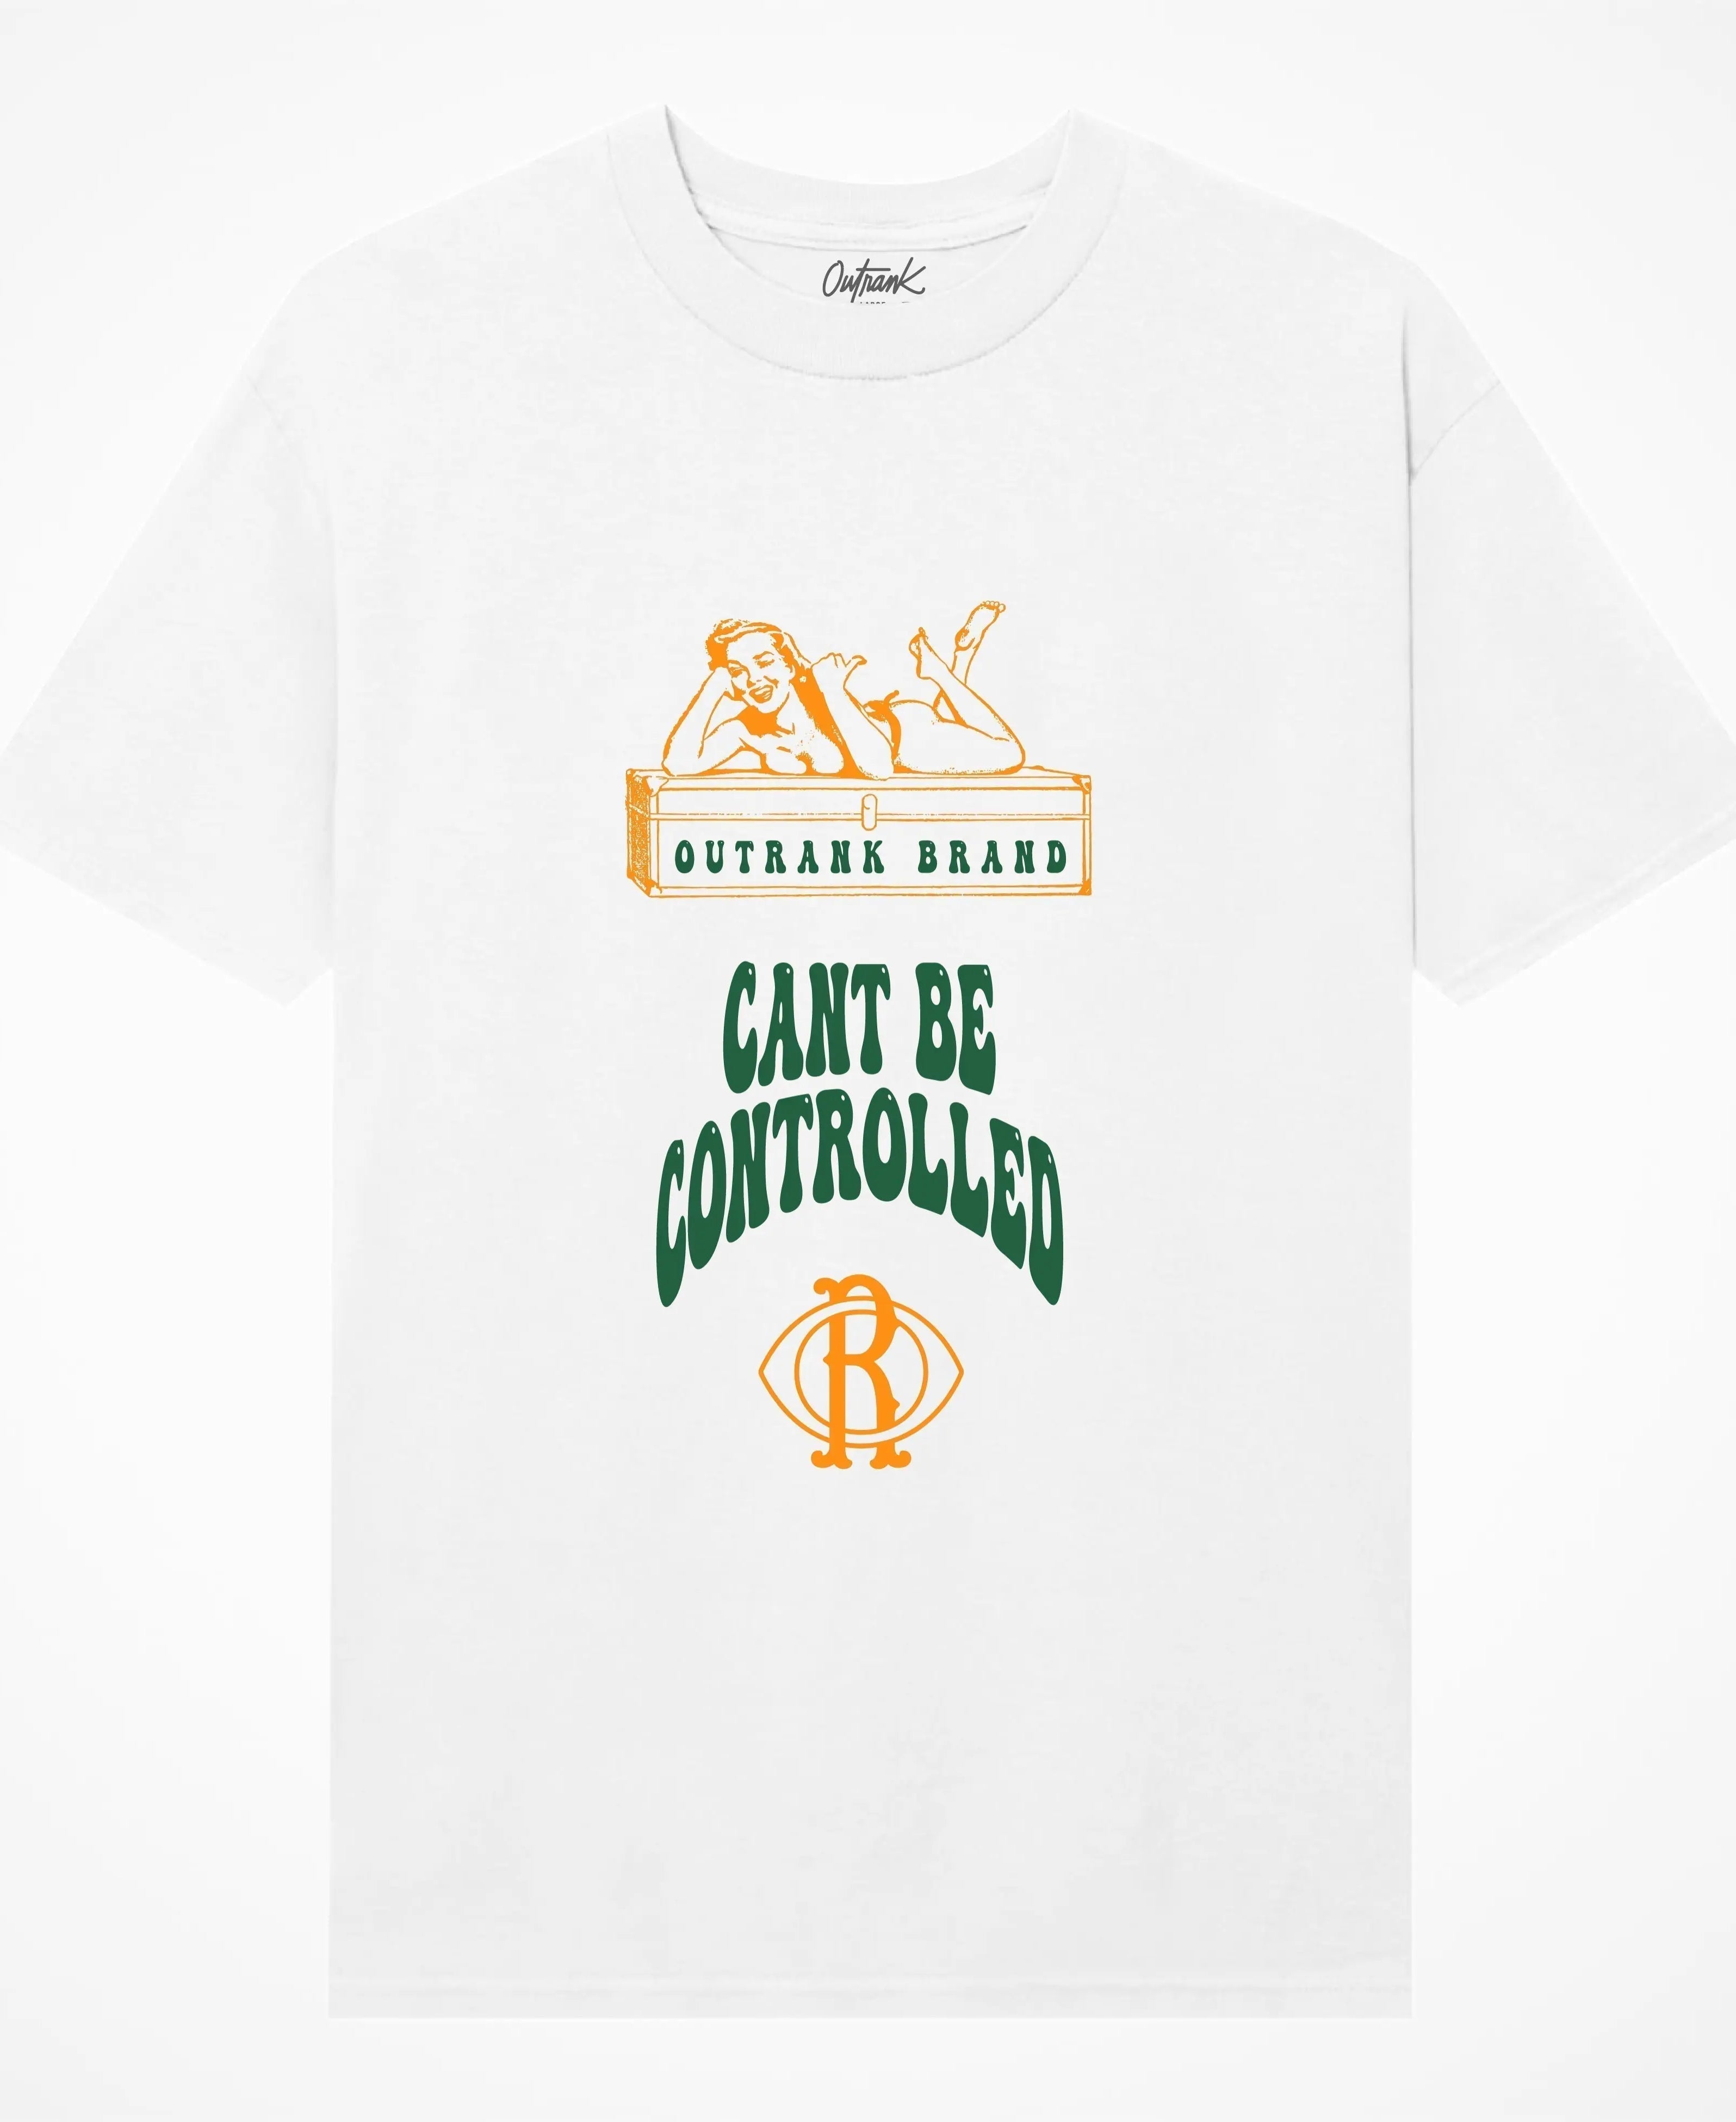 Can't Be Controlled T-Shirt - Outrank